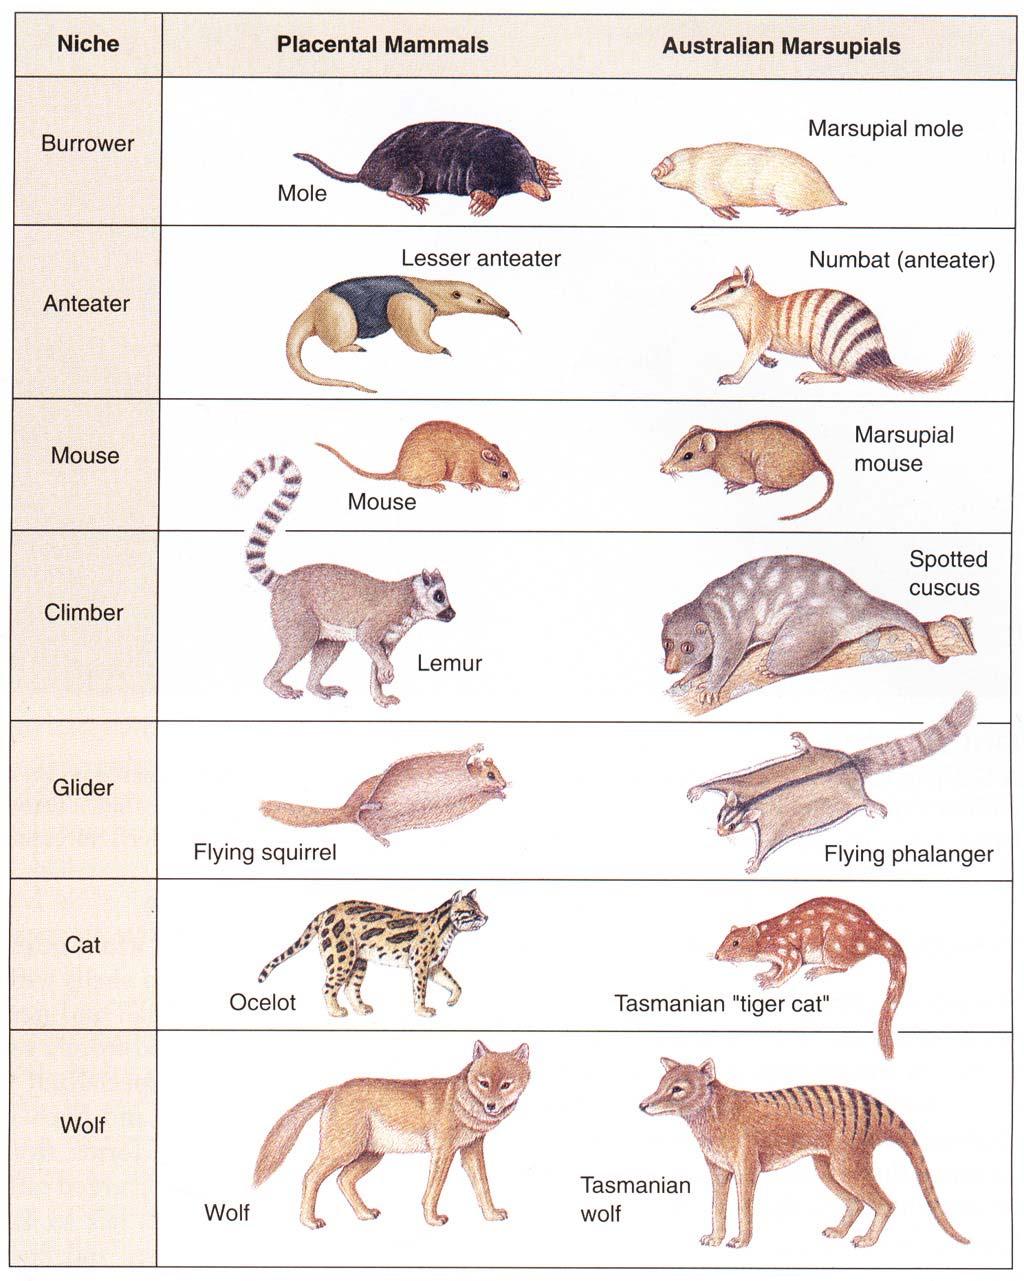 Figure 37-8. Showing convergent evolution in the marsupials of Australia and the placental mammals in the rest of the world.